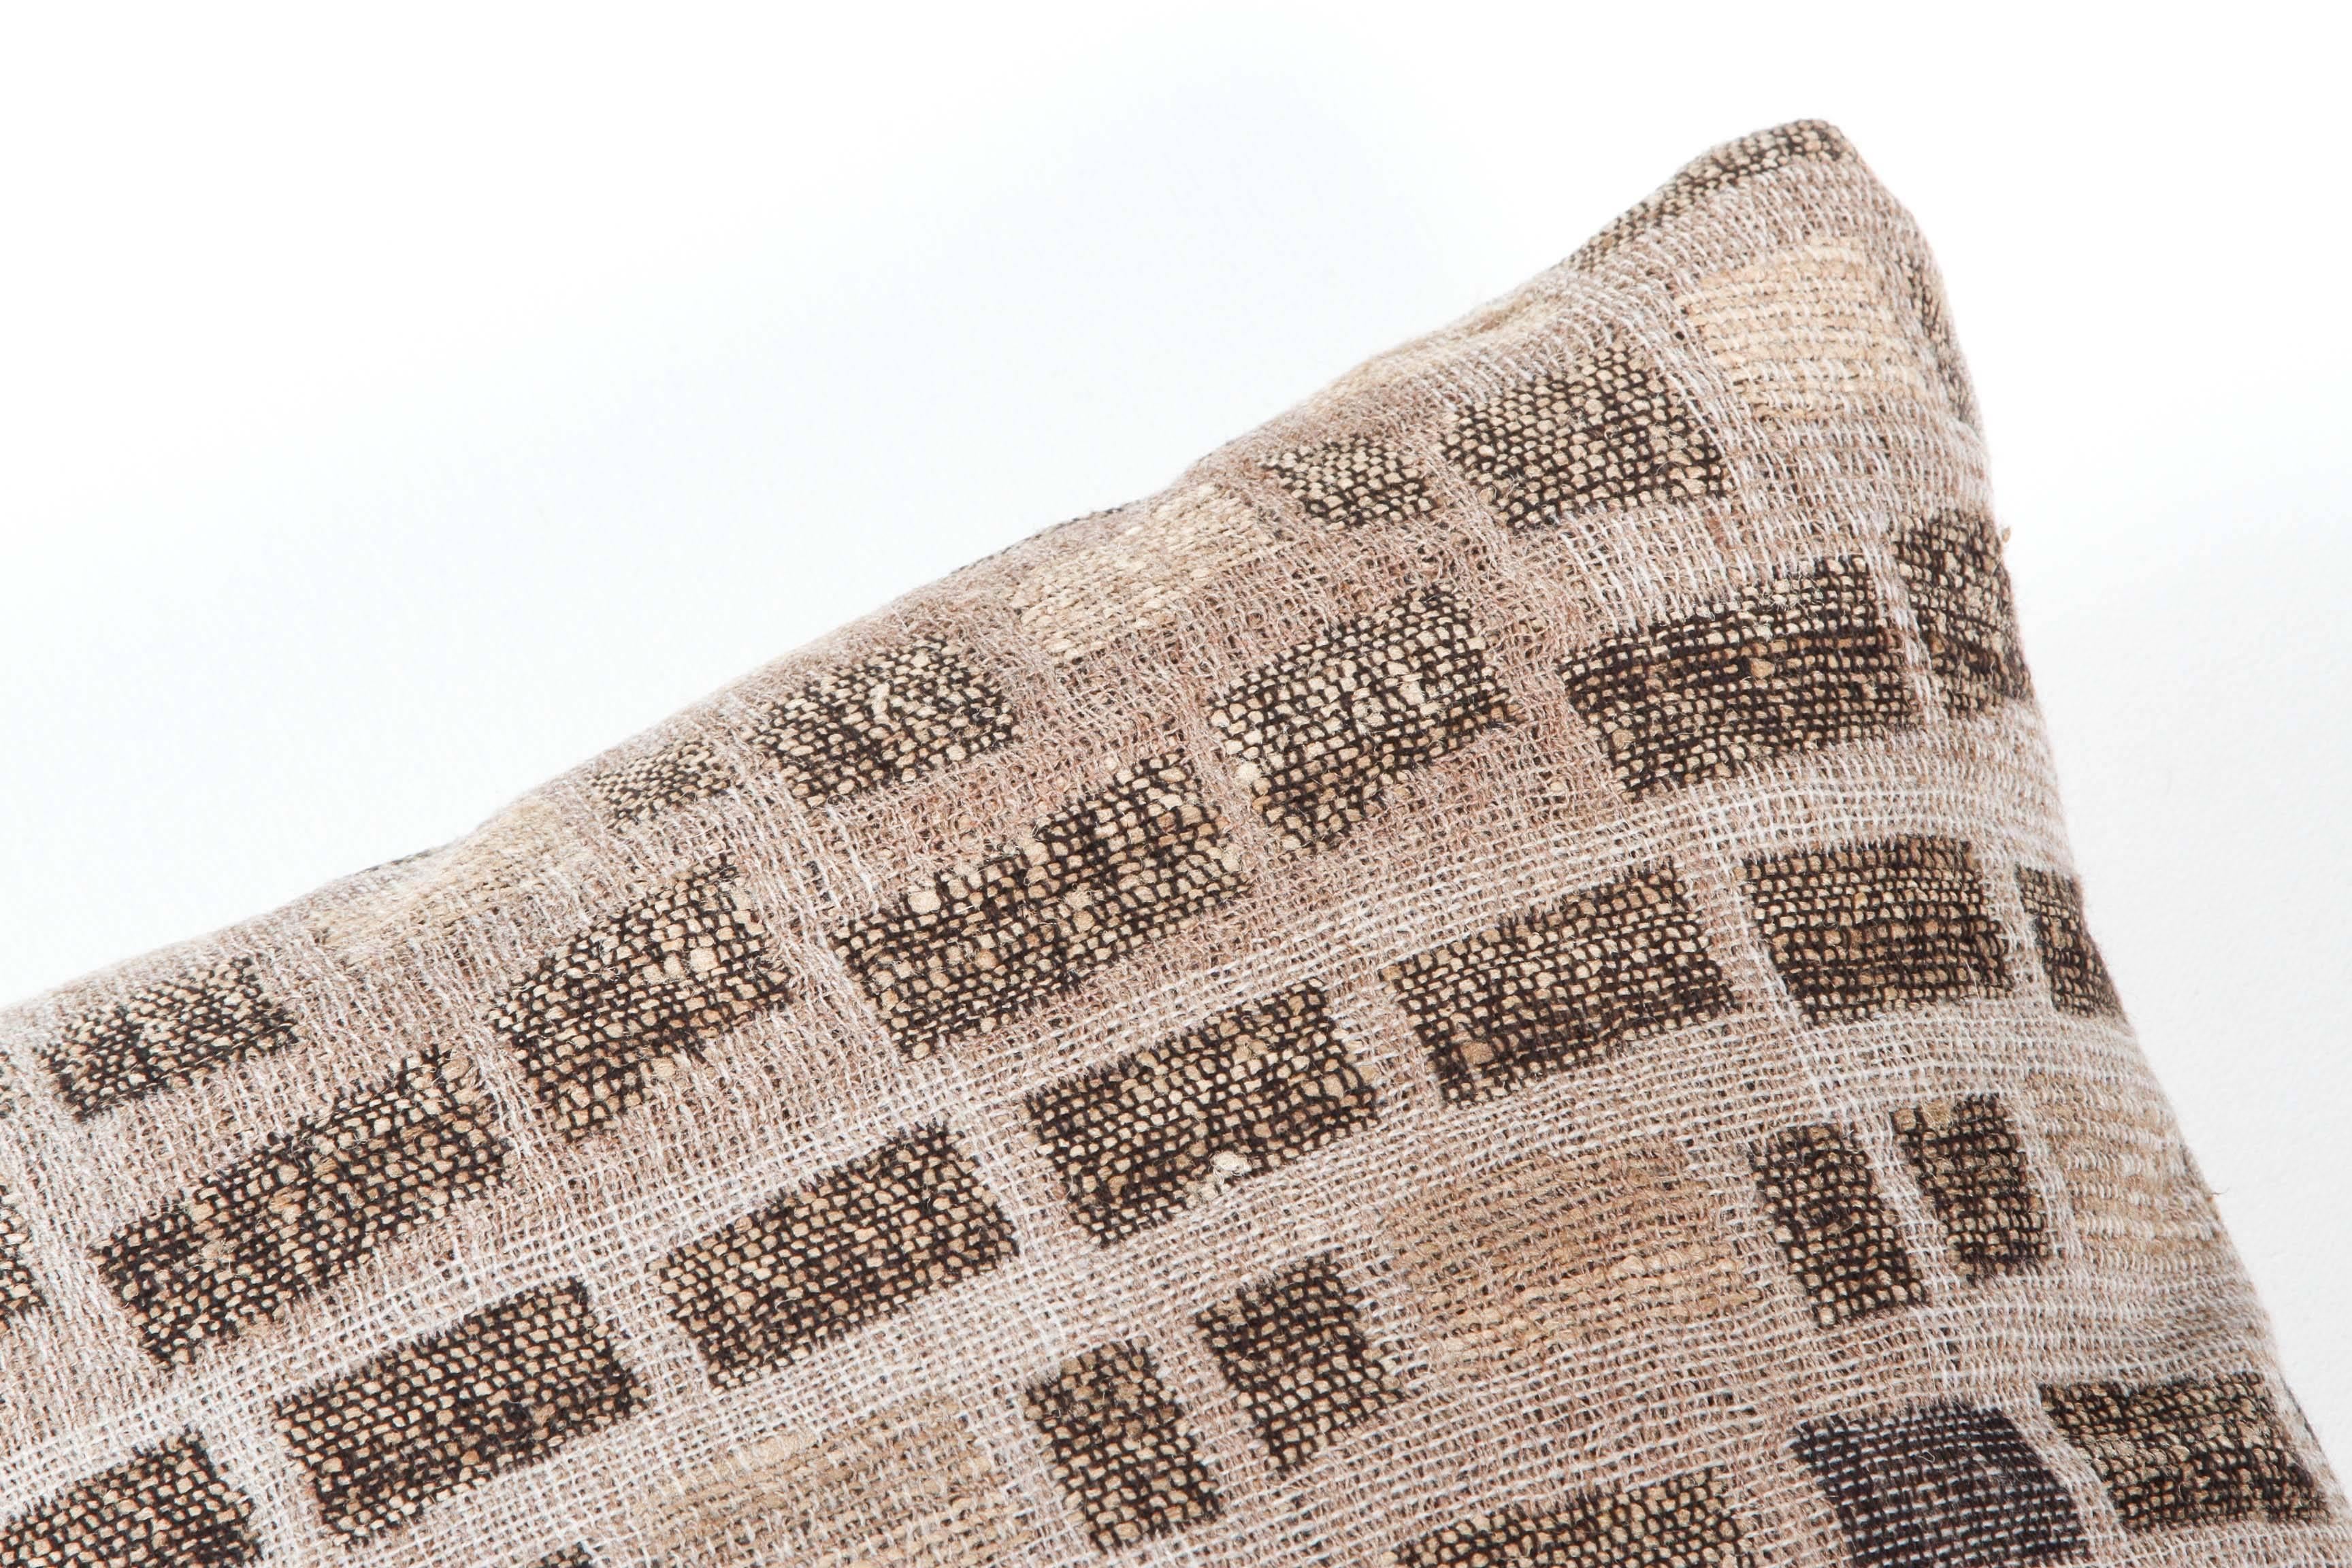 A contemporary line of cushions, pillows, throws, bedcovers, bedspreads and yardage hand woven in India on antique Jacquard looms. Handspun wool, cotton, linen, and raw silk give the textiles an appealing uneven quality.

This wool and raw Tussar